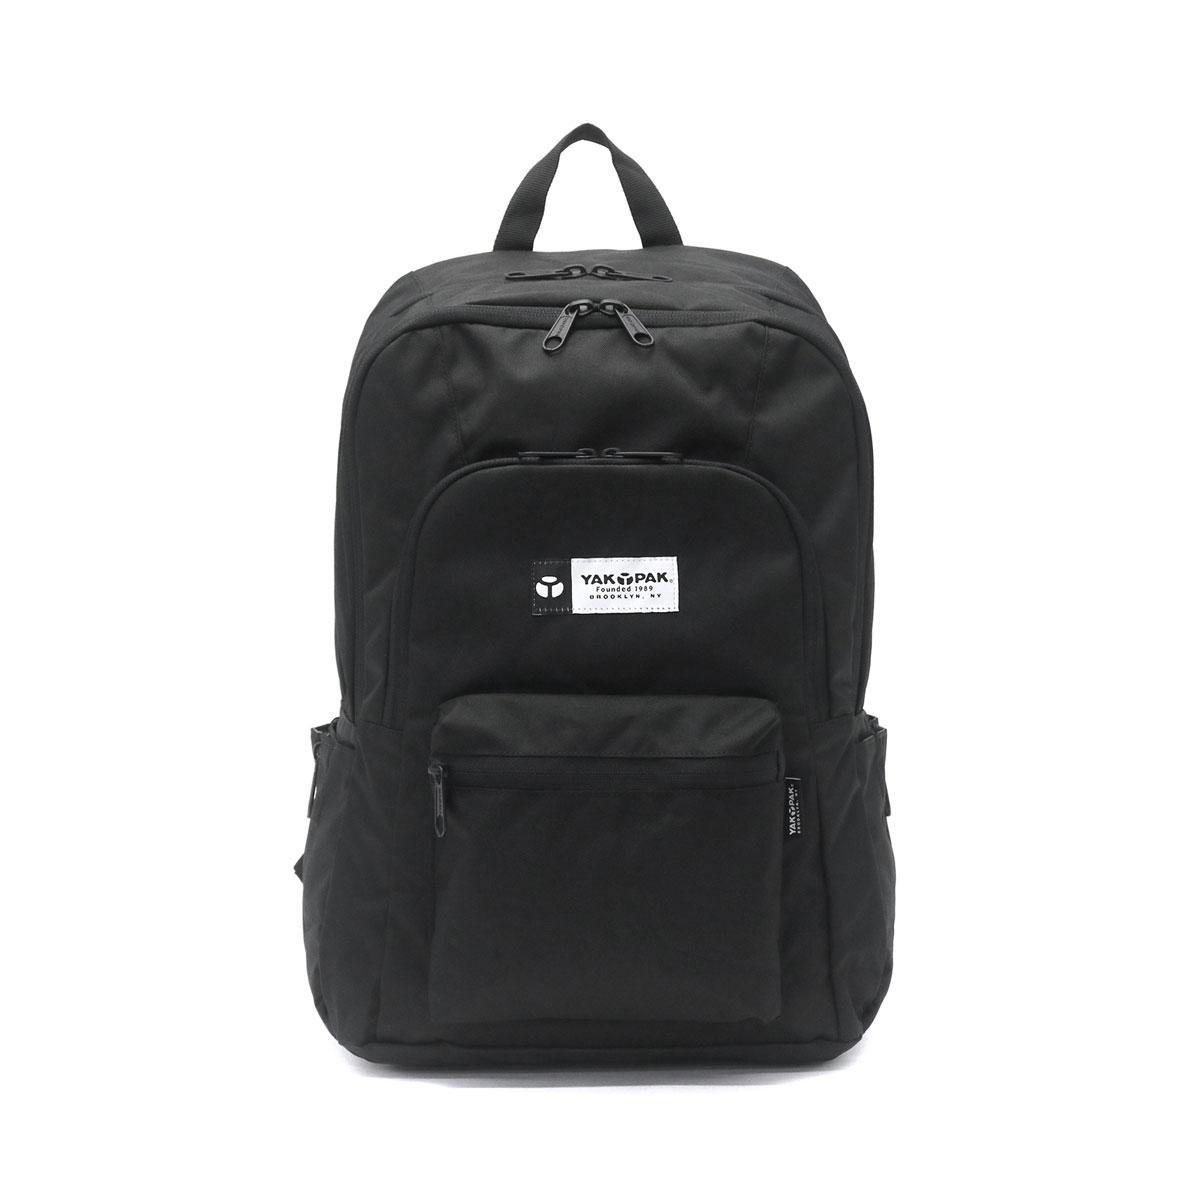 YAKPAK ヤックパック FORCE BACKPACK バックパック 25L 8125321 